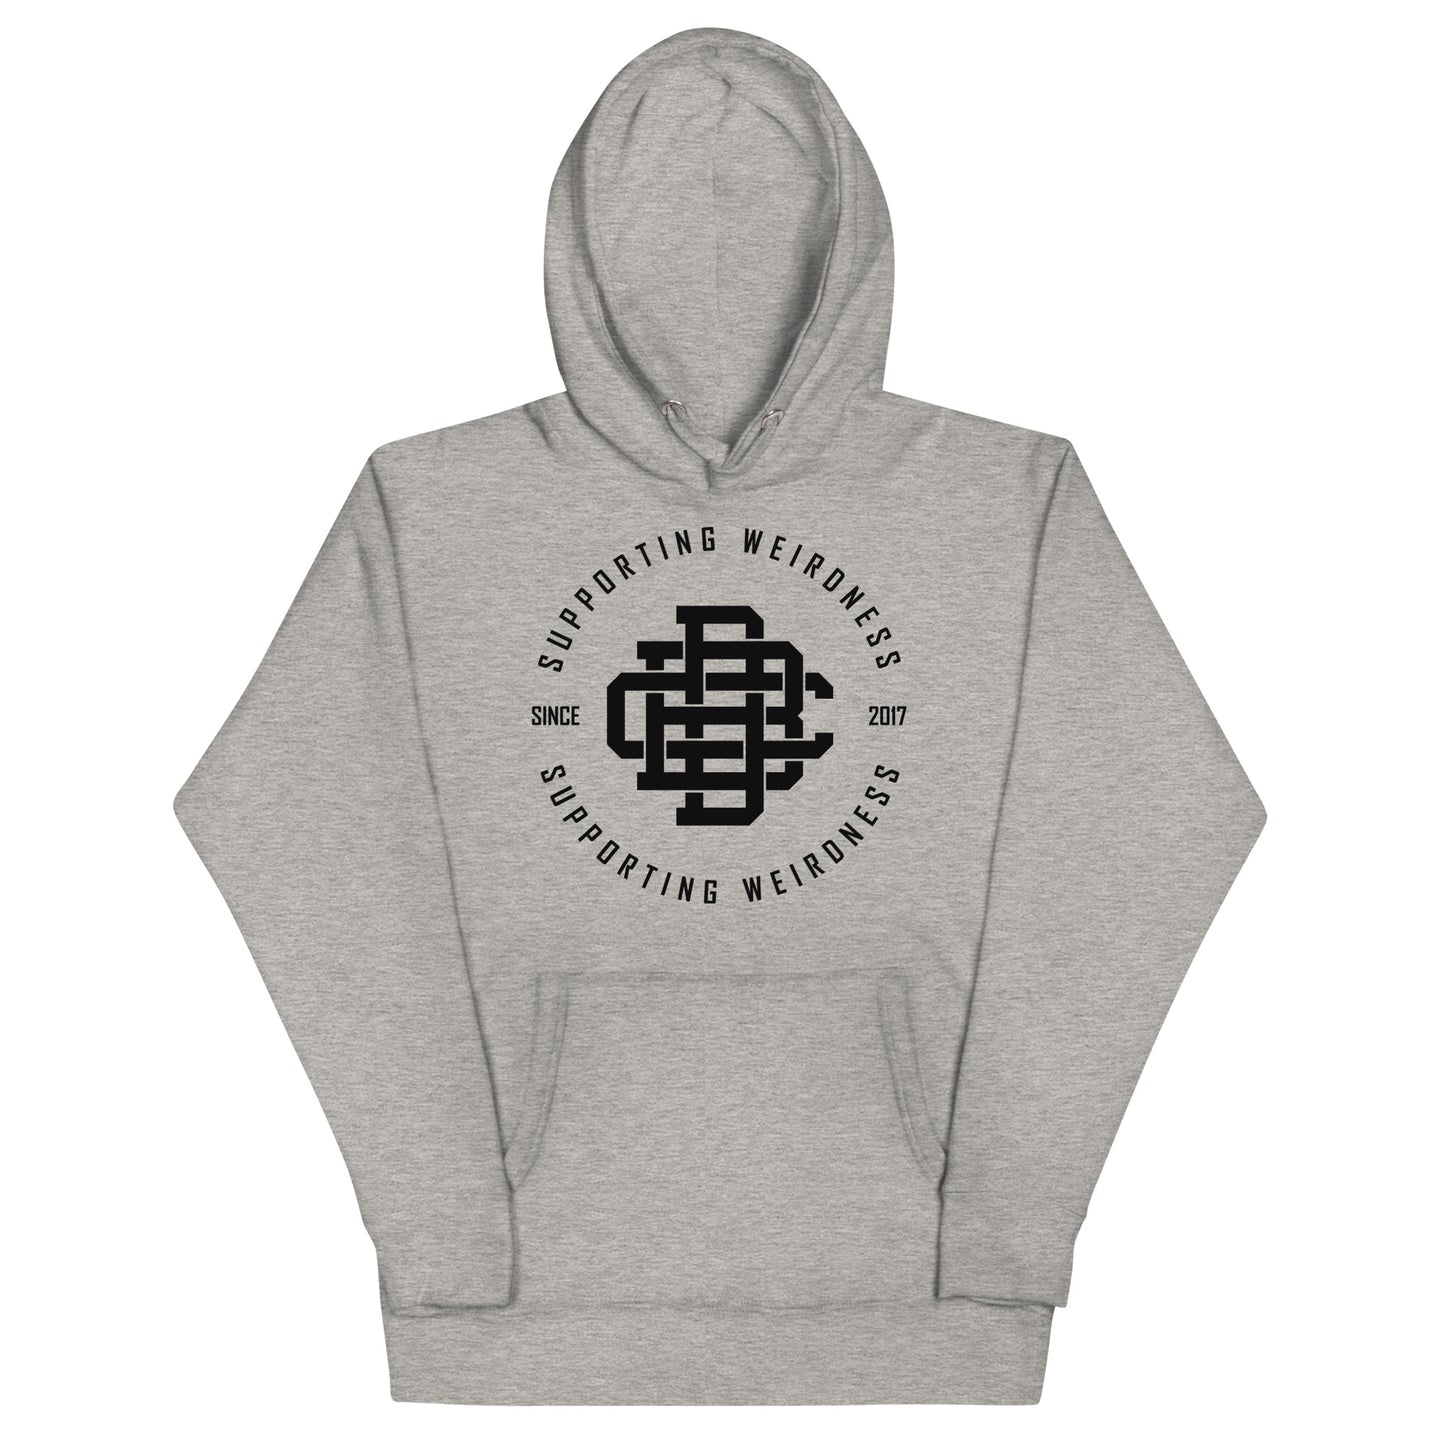 BDC hoodie gray by B.Different Clothing street art graffiti inspired brand for weirdos, outsiders, and misfits.